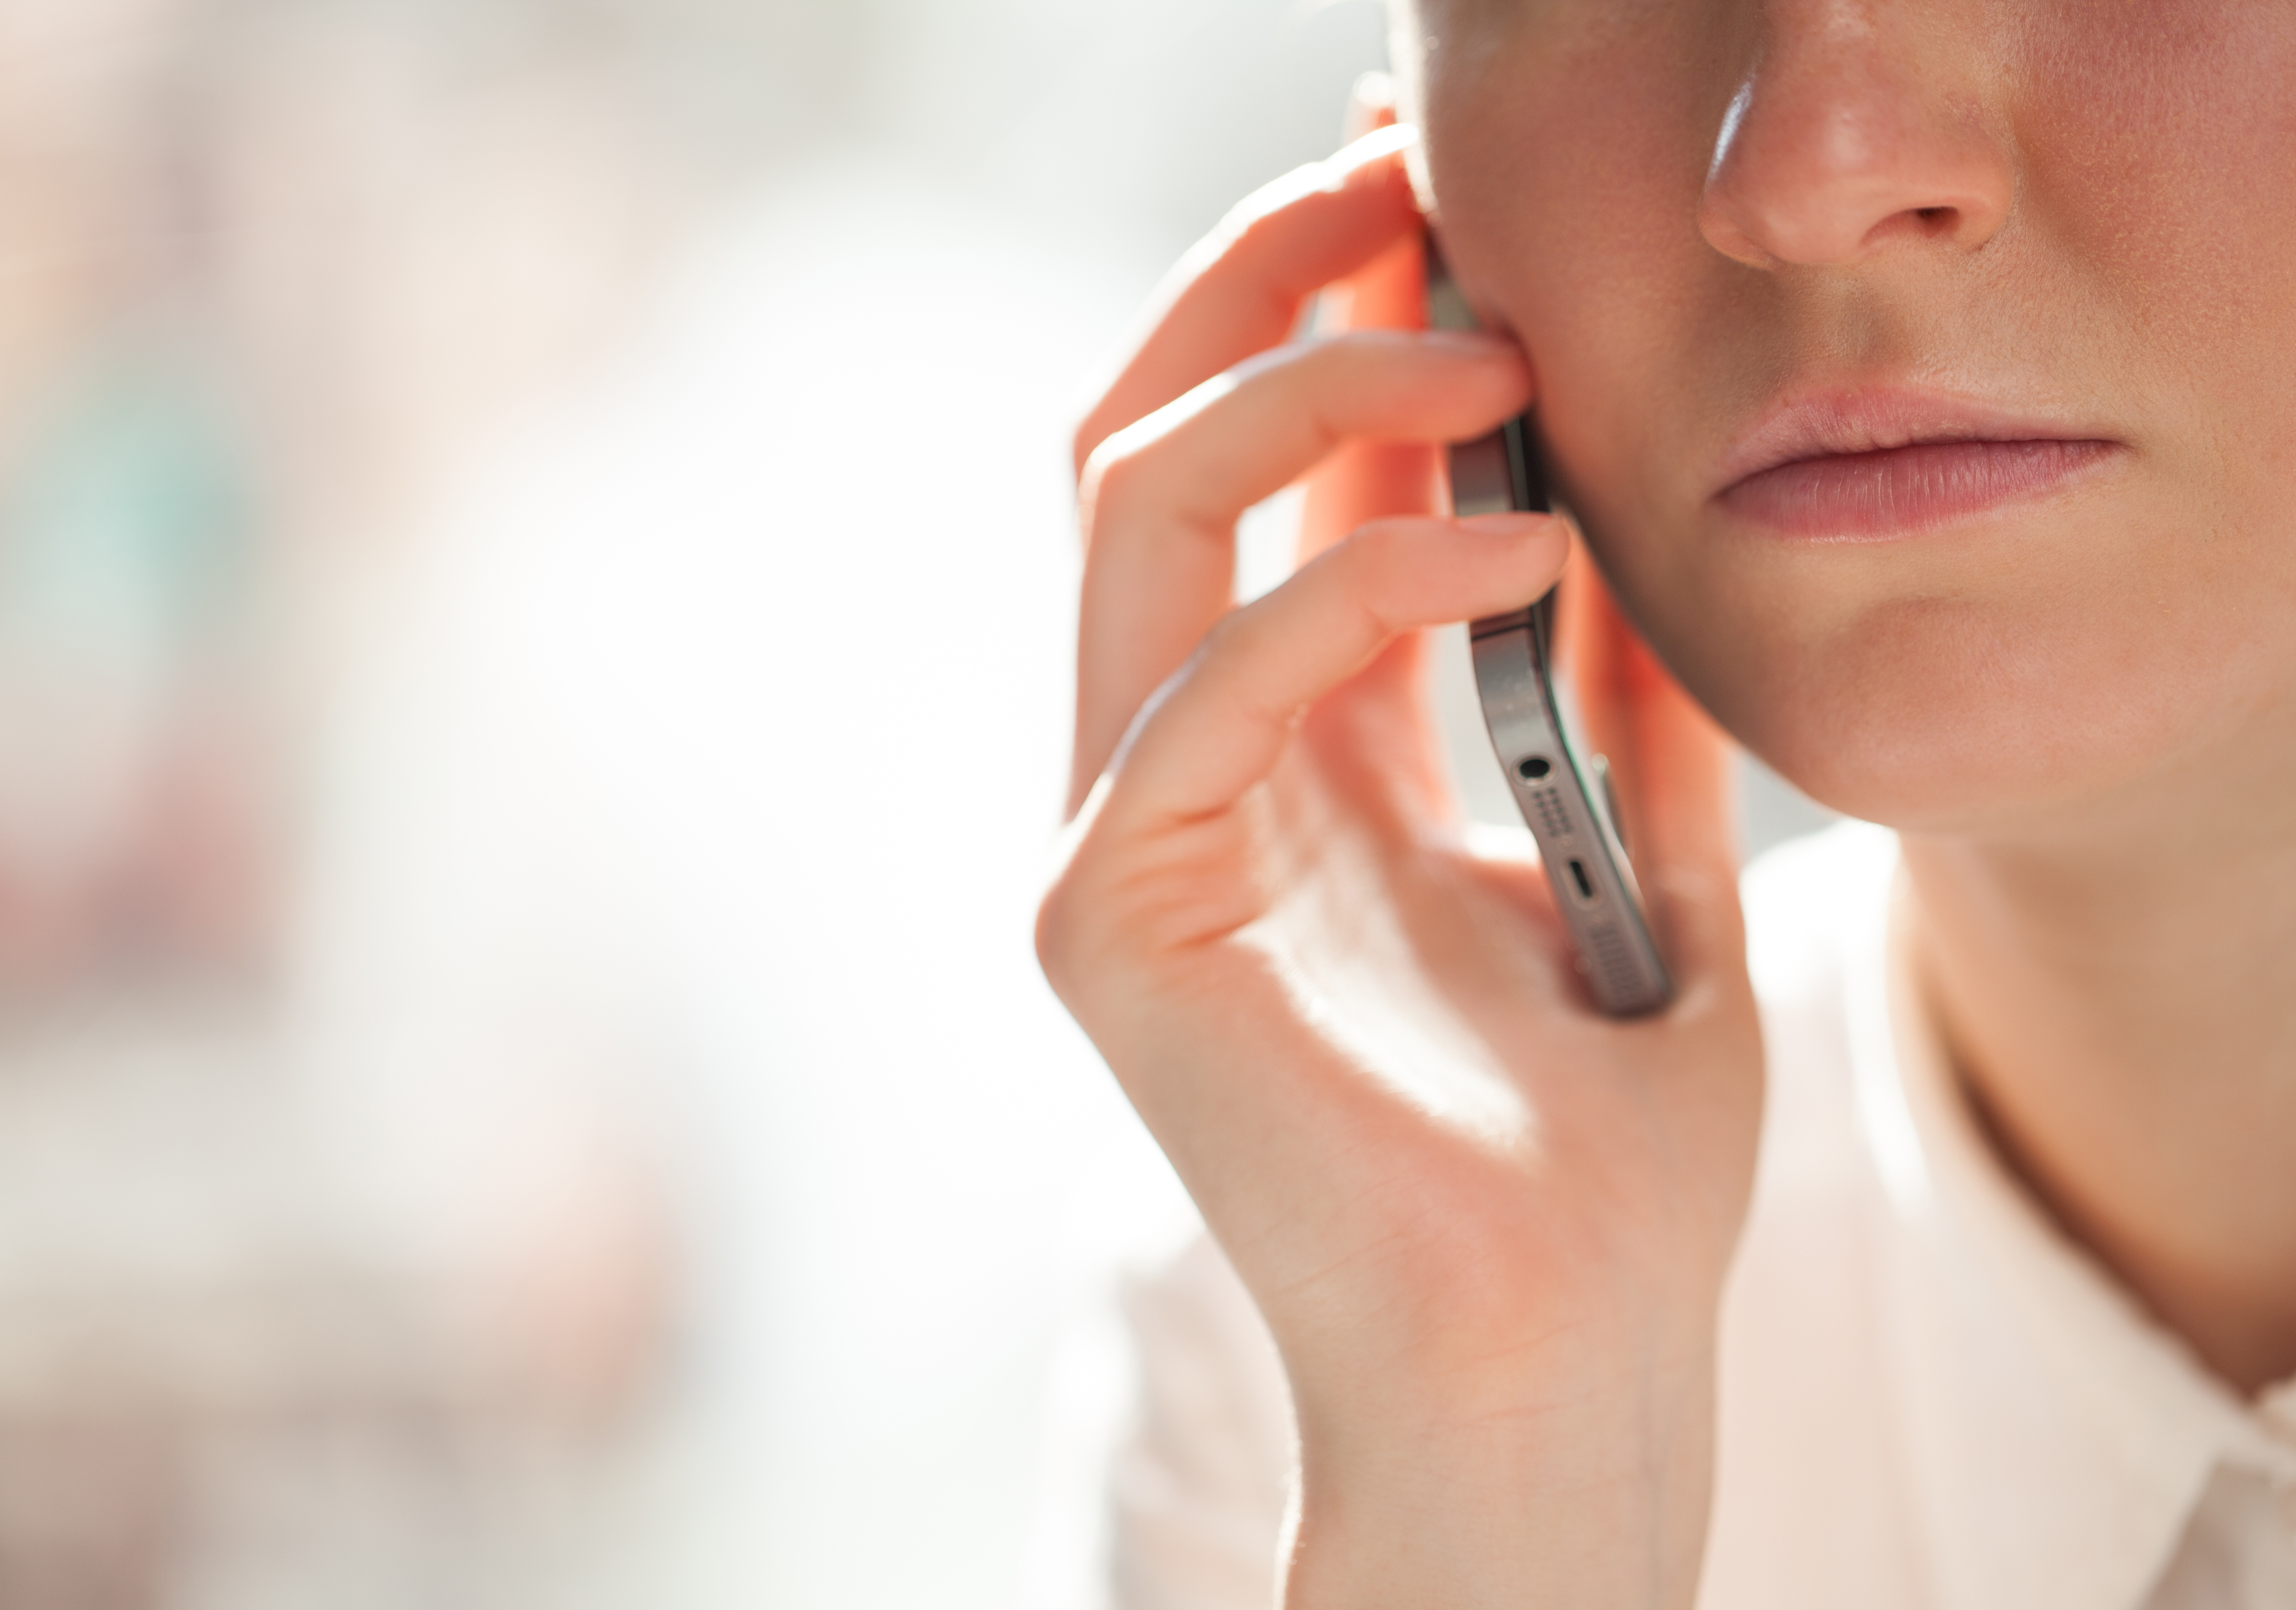 A close-up shot of a woman talking on the phone | Source: Shutterstock